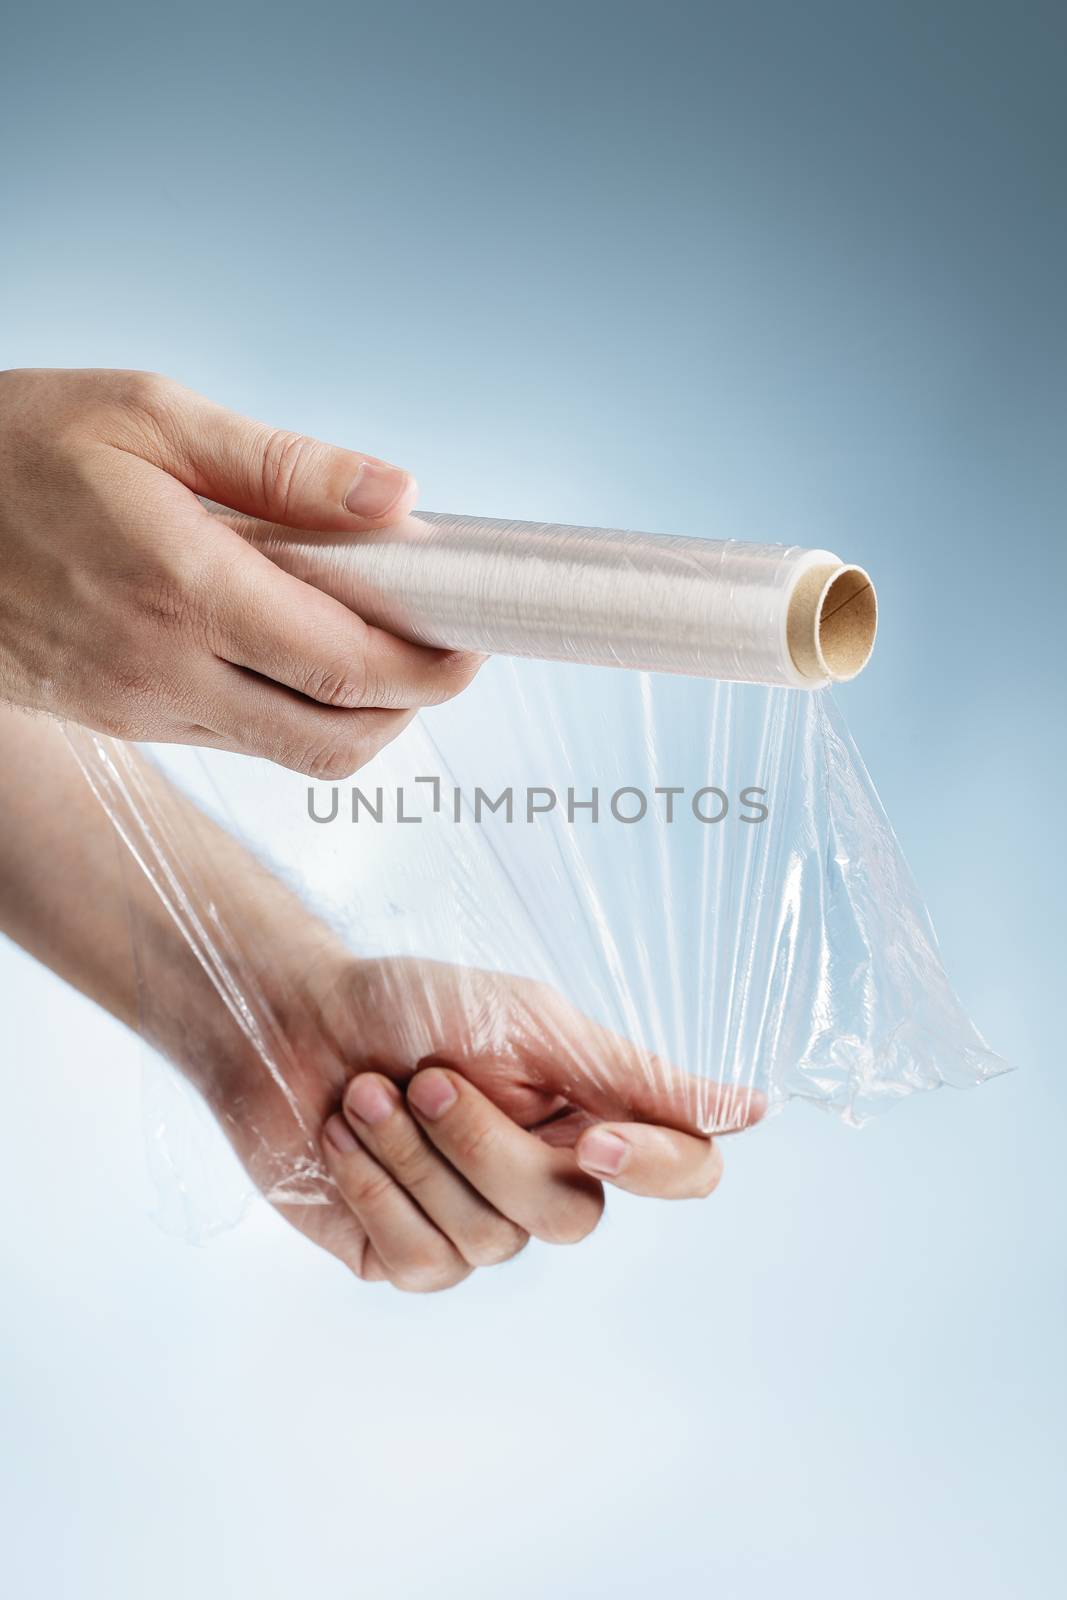 Cling film by Stocksnapper